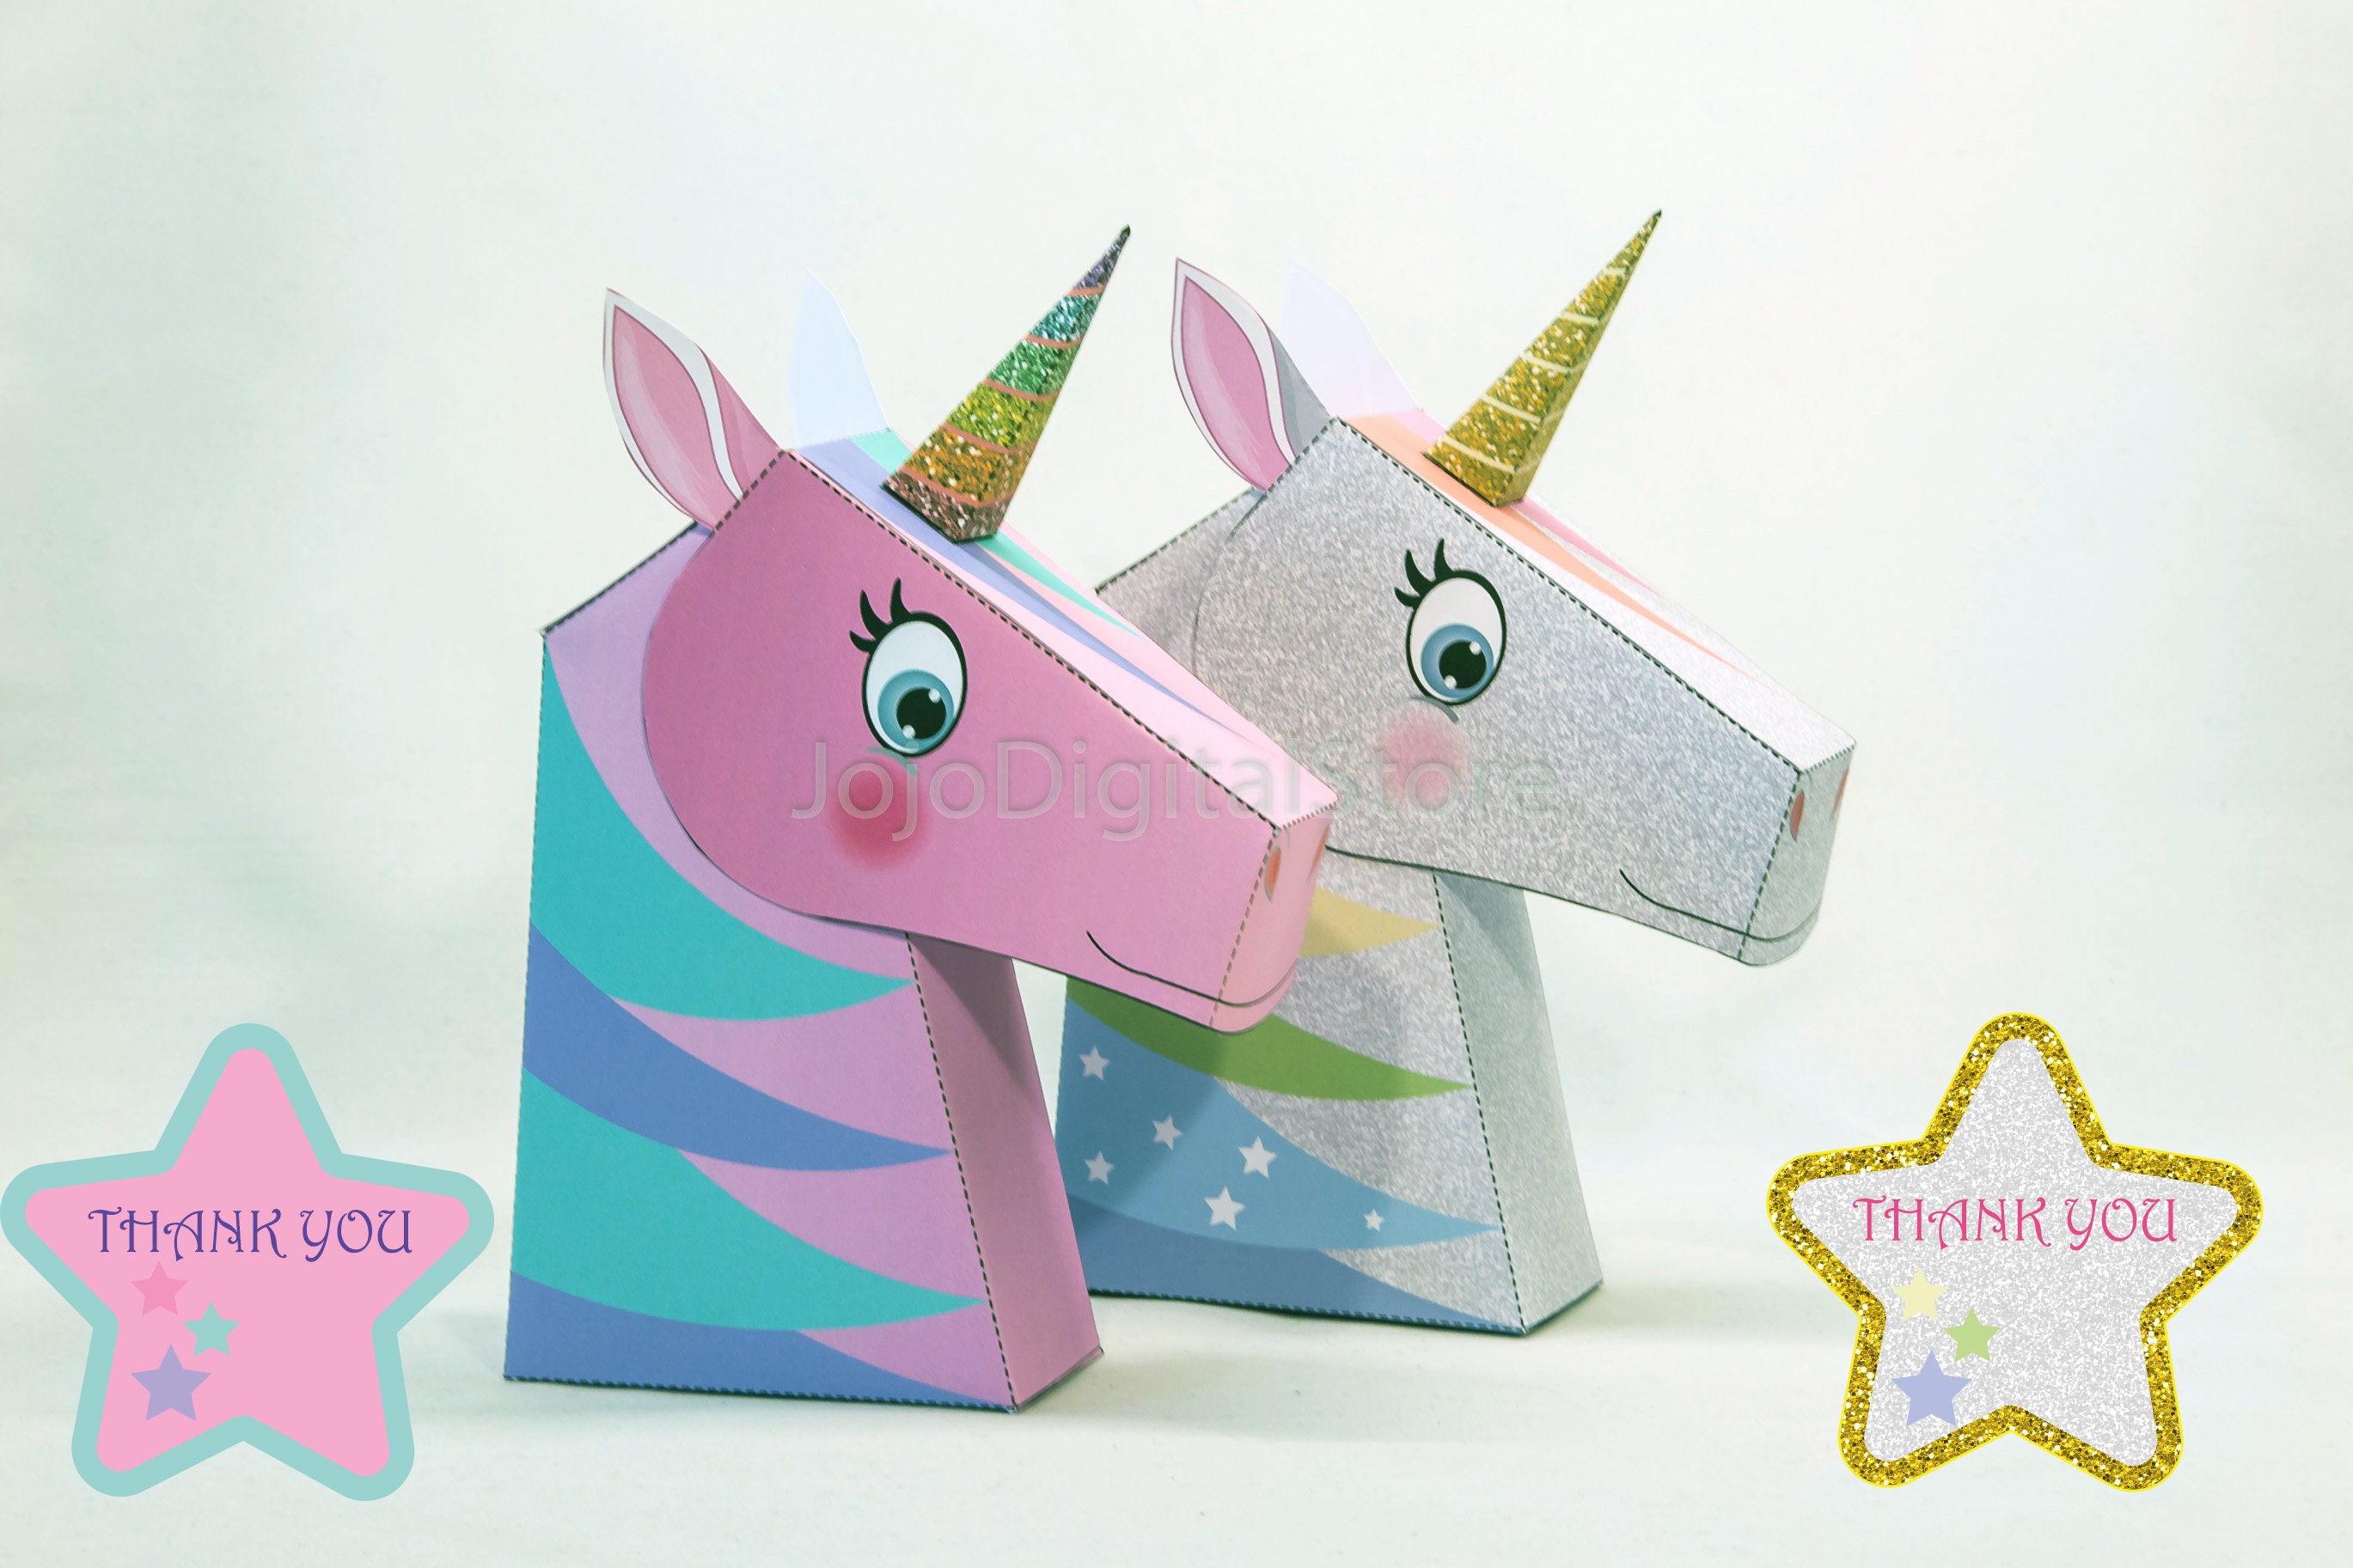 Unicorns Gifts for Girls in Giftable Box - Colorful Glitter